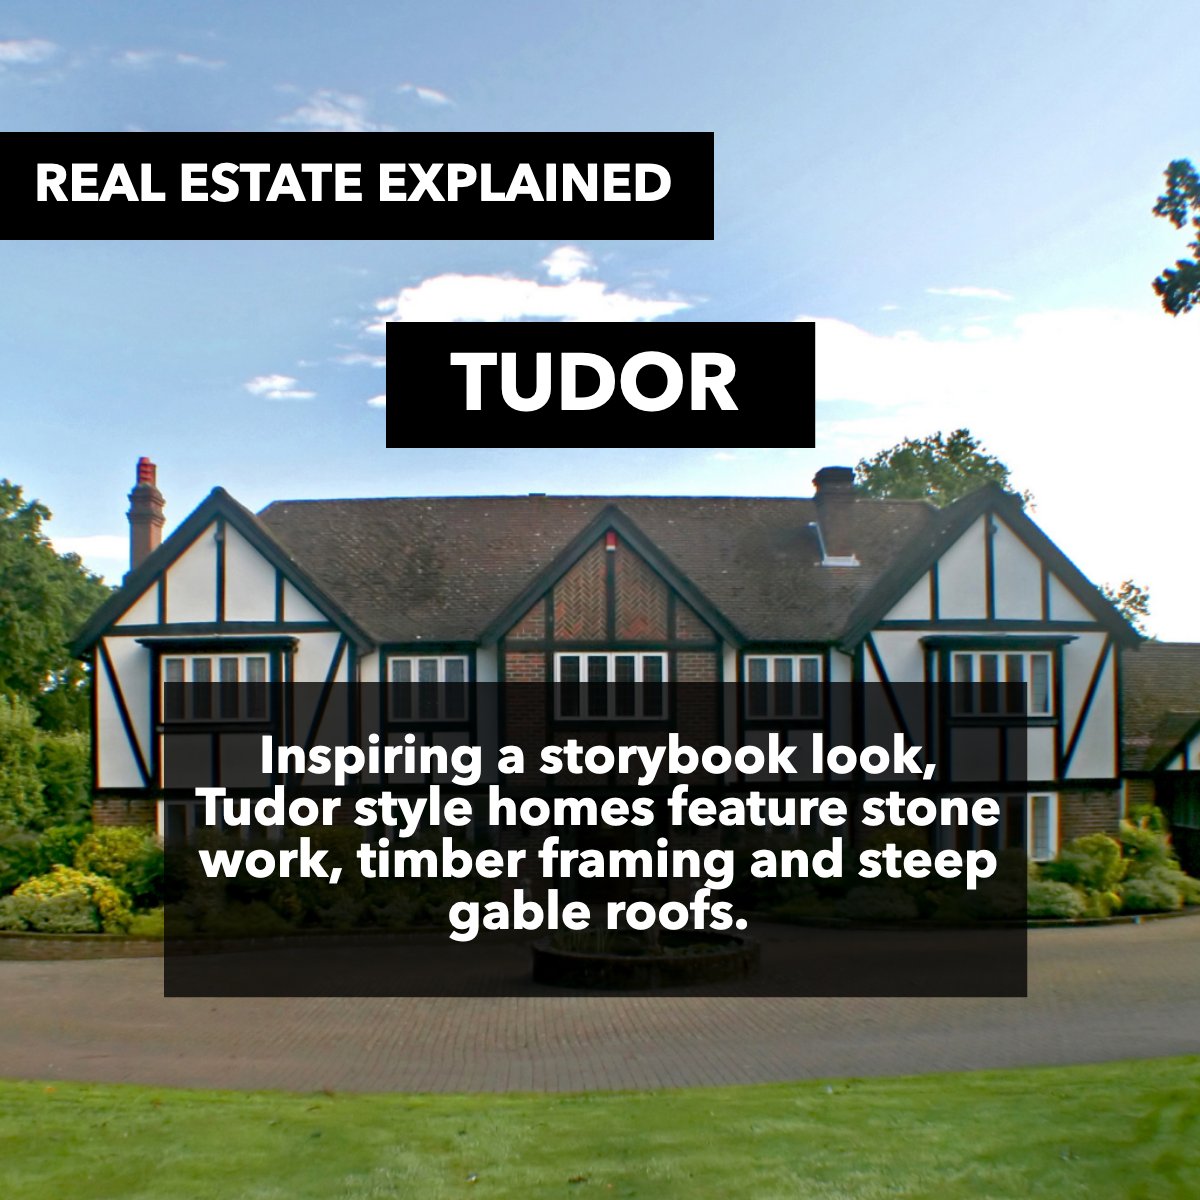 Charming, intricate, and classic, they have been an iconic home style in North America since the 19th century. 🏘️

#tudorstylearchitecture #tudorstylehome #styletudors